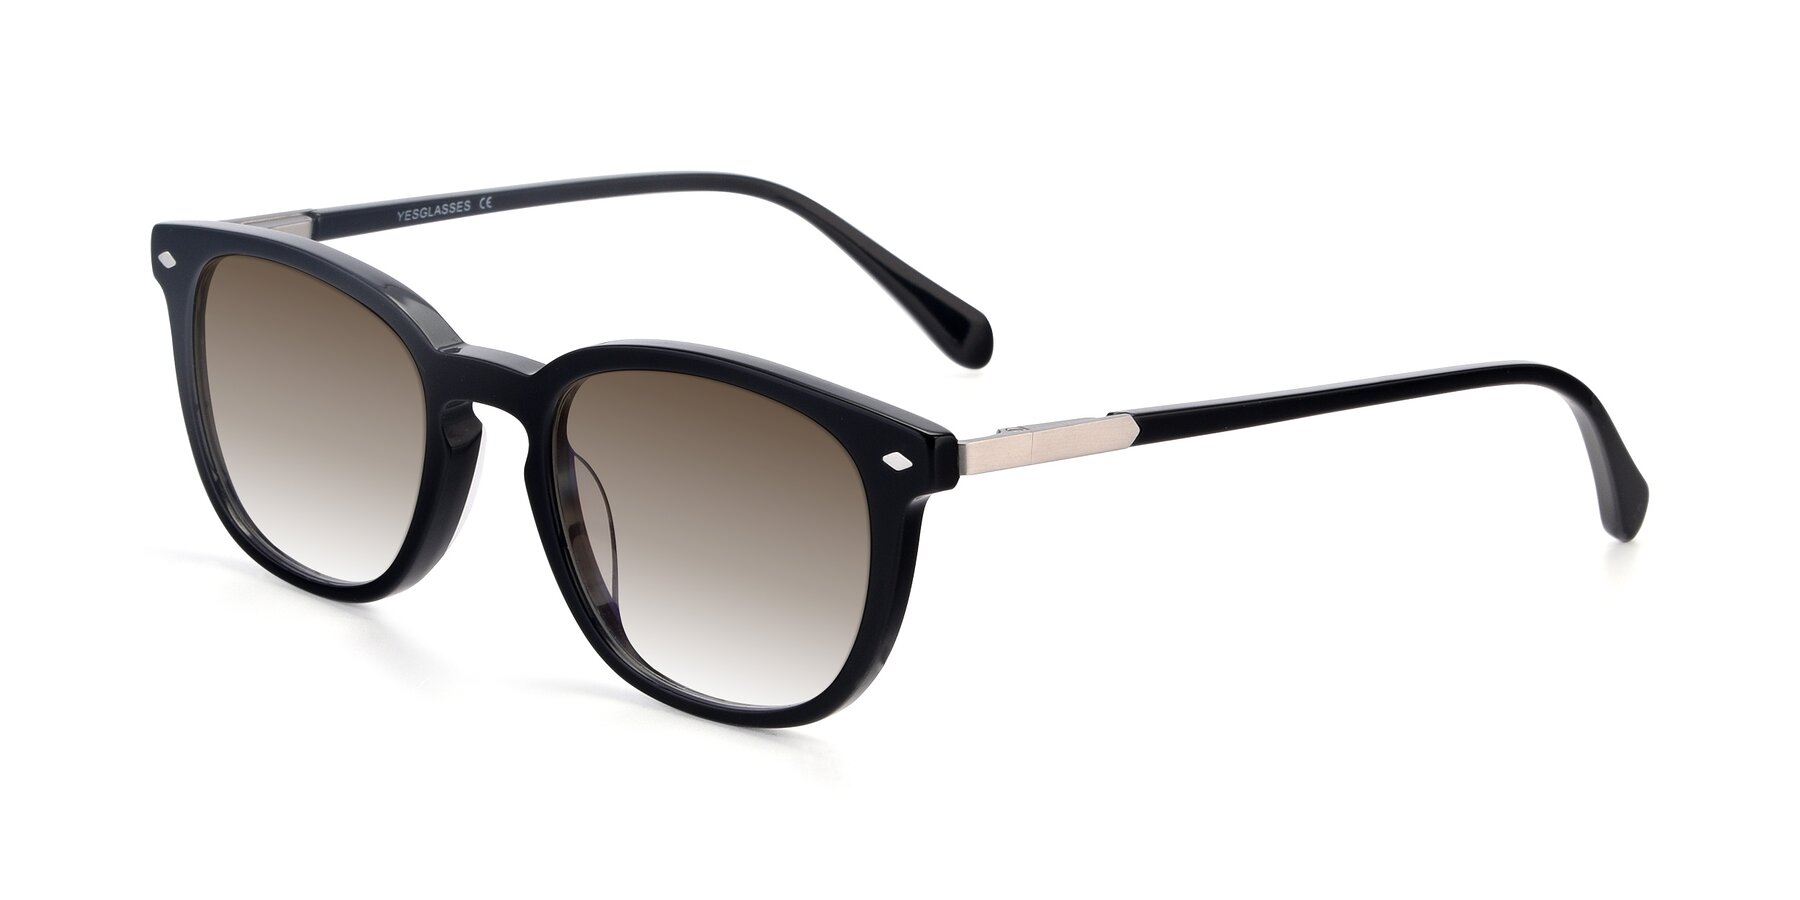 Angle of 17578 in Black with Brown Gradient Lenses